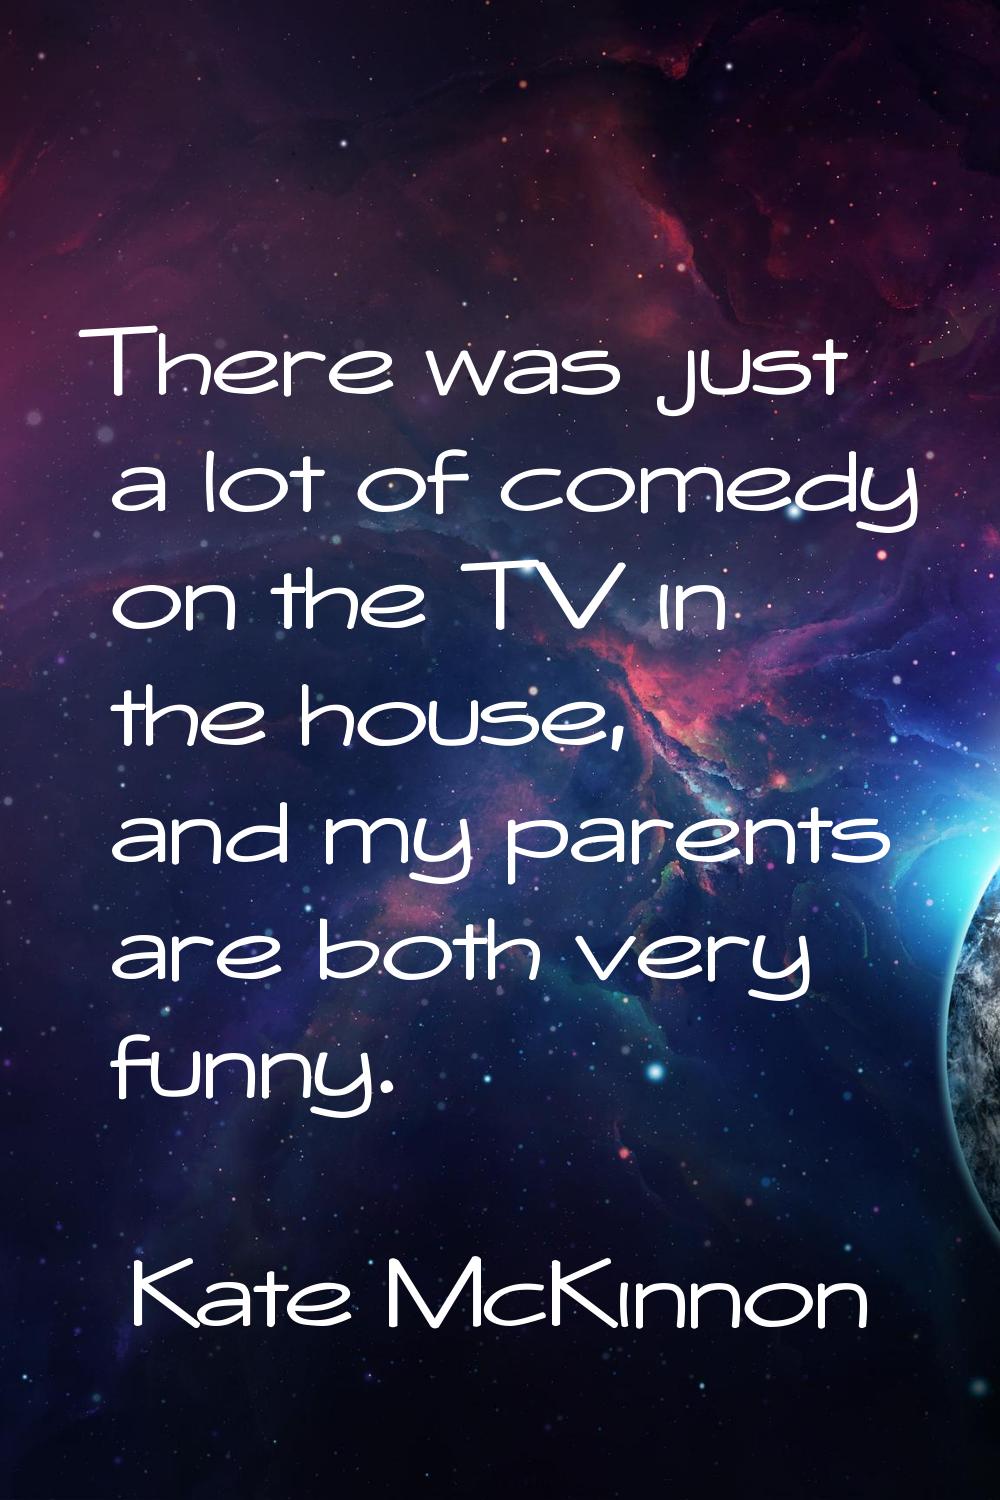 There was just a lot of comedy on the TV in the house, and my parents are both very funny.